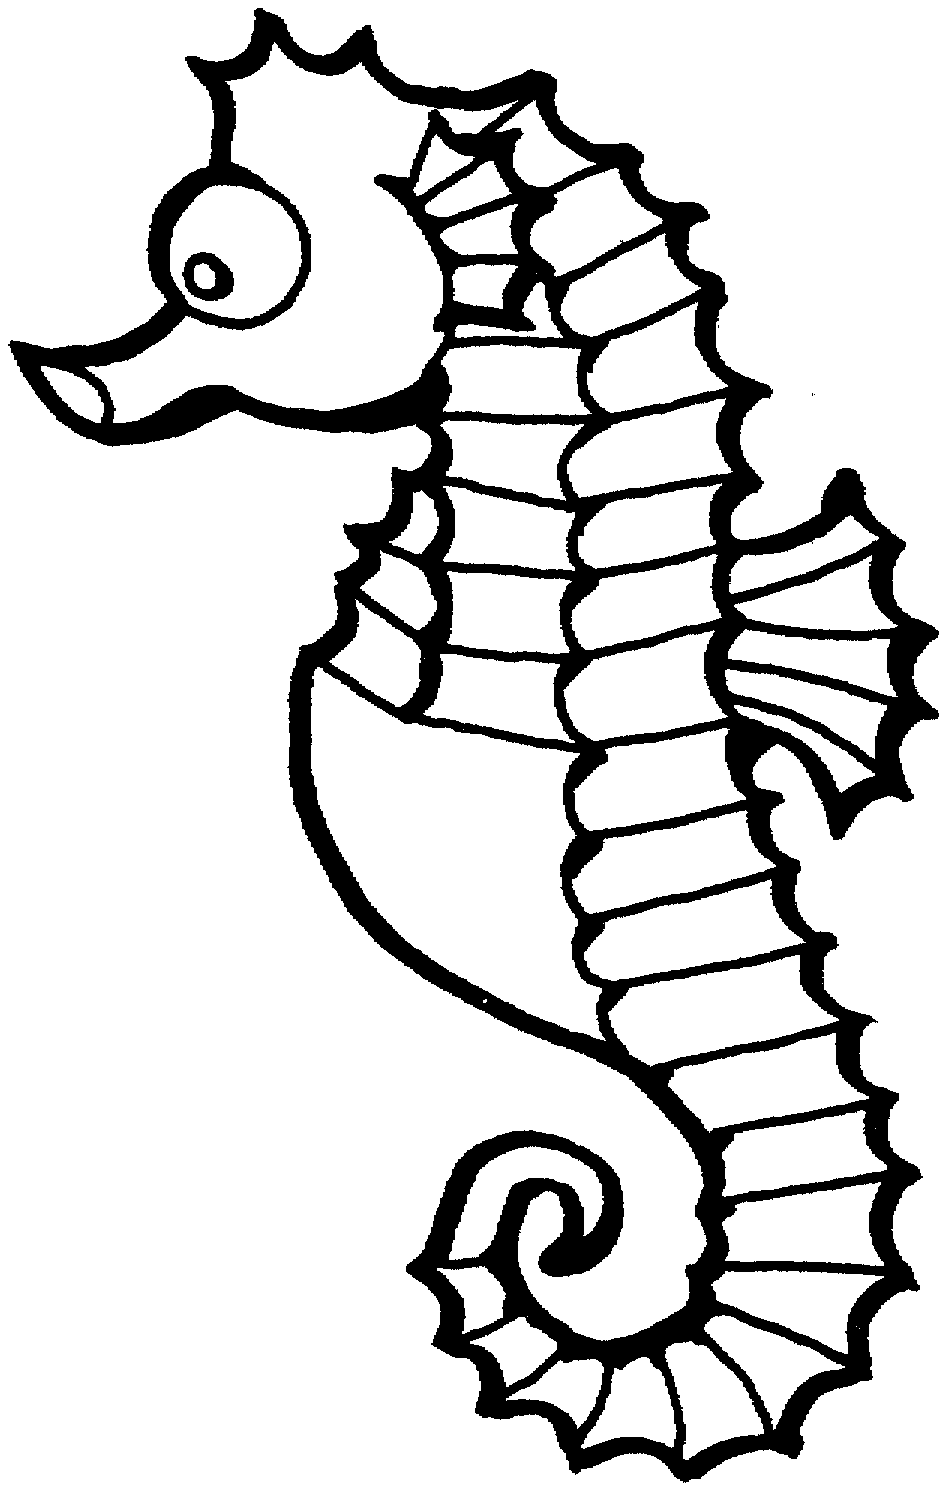 Seahorse Clipart Black And White   Clipart Best